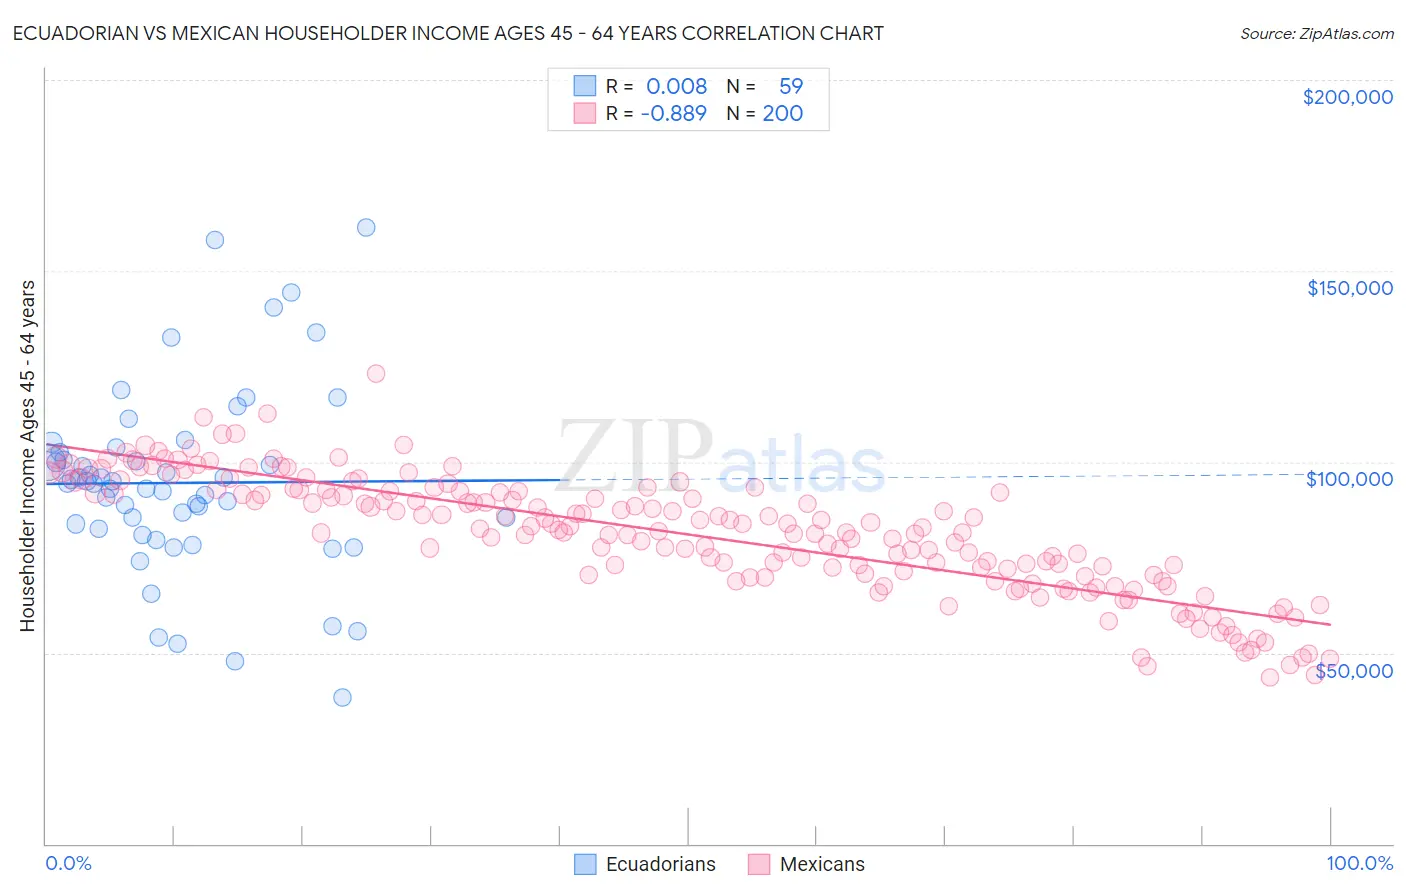 Ecuadorian vs Mexican Householder Income Ages 45 - 64 years